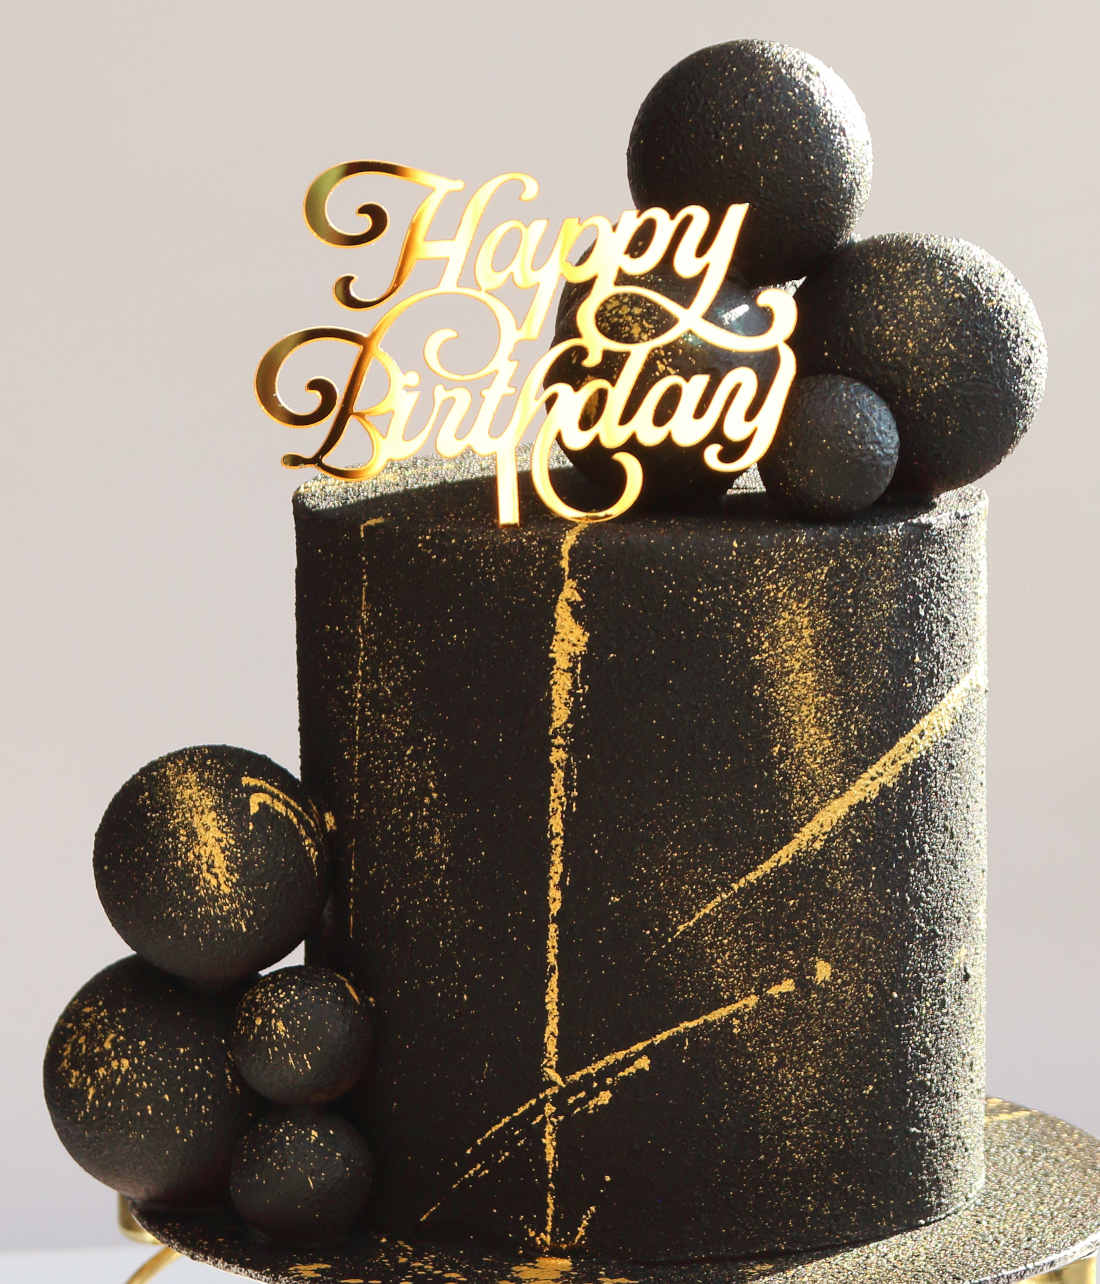 Black cake with chocolate velor, balls and gold paint